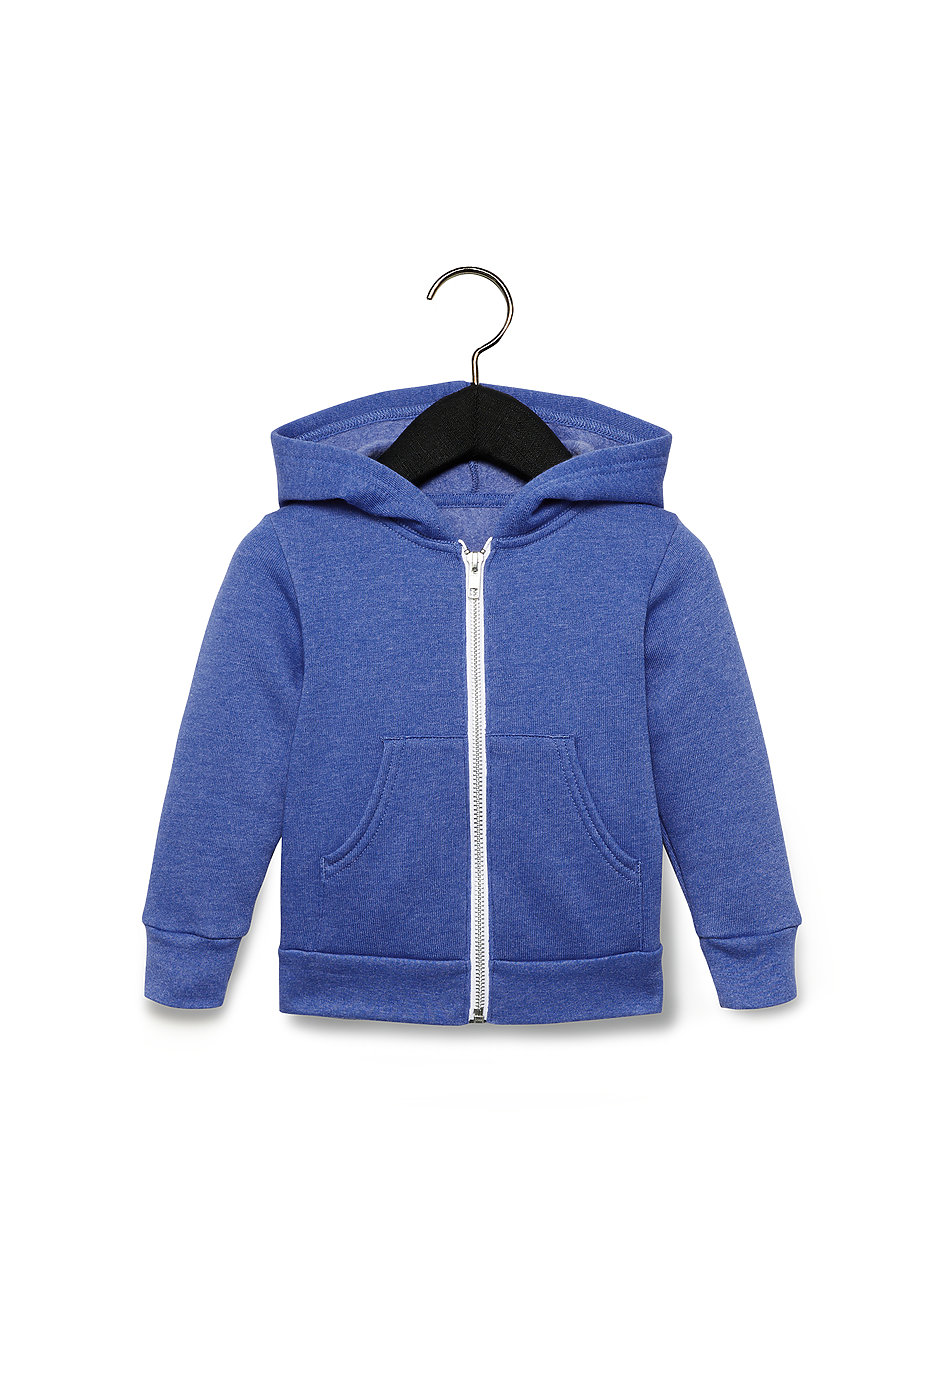 Toddler sweat suits wholesale